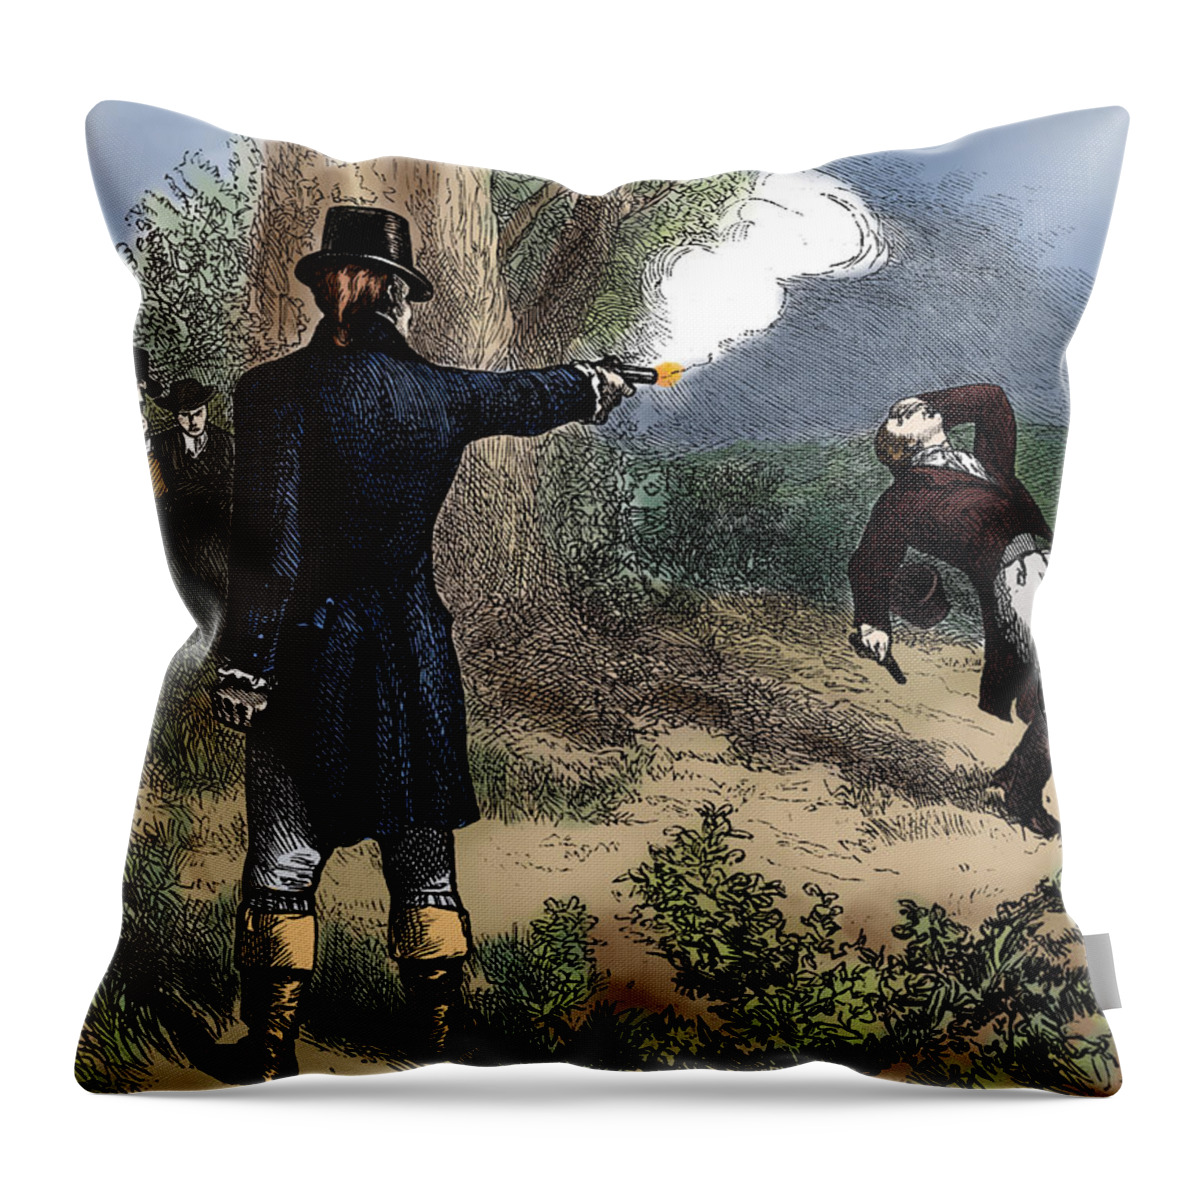 Government Throw Pillow featuring the photograph Burr-hamilton Duel, 1804 by Science Source